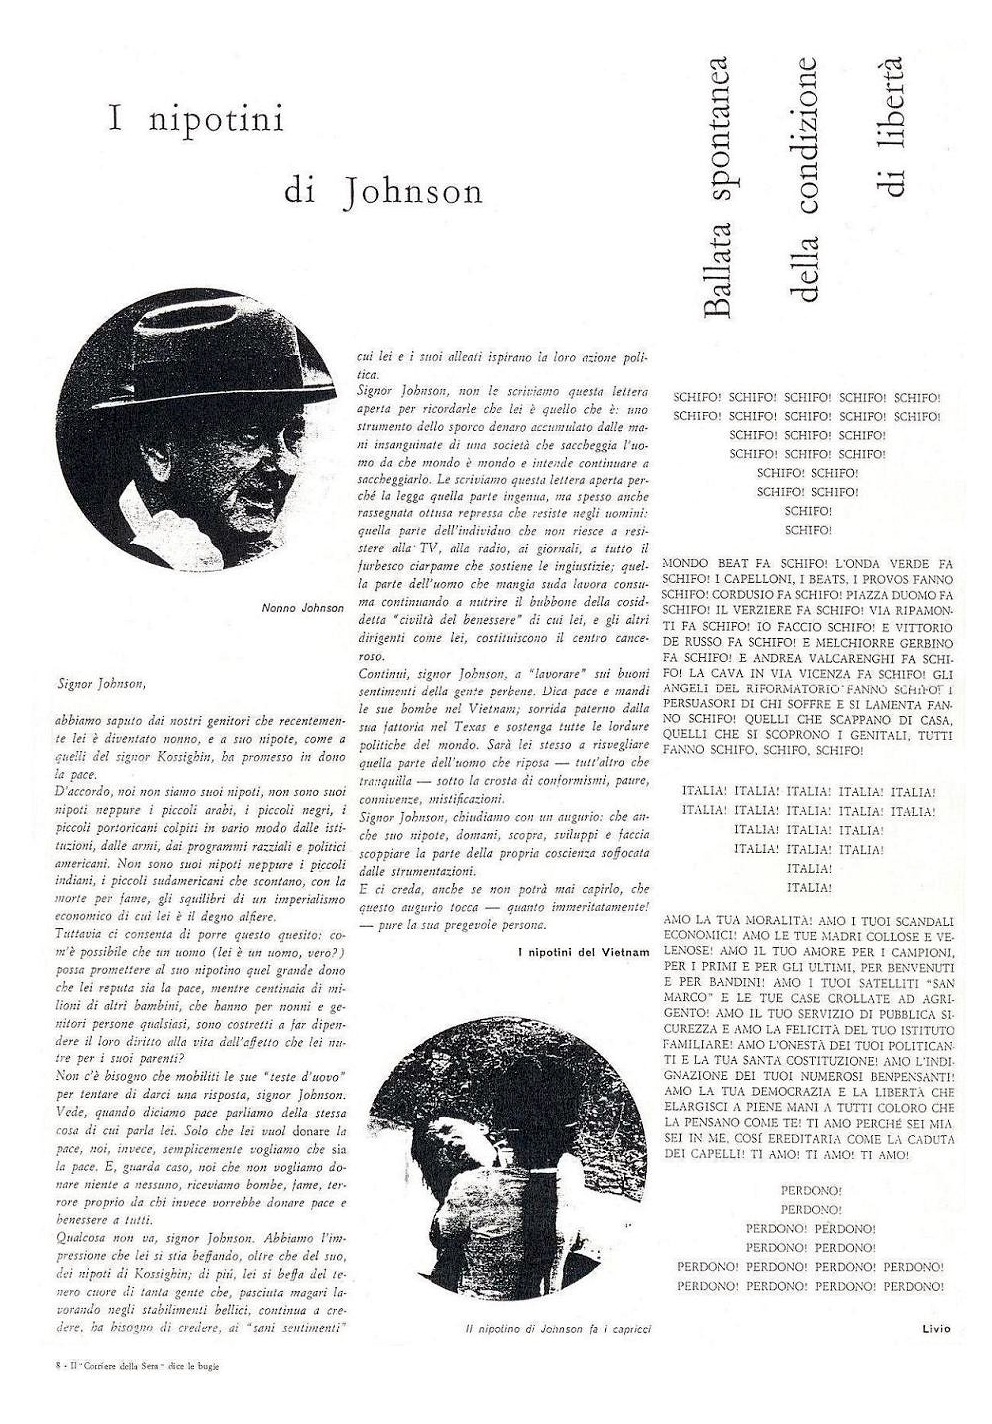 The seventh and last issue of Mondo Beat magazine - Milan, late July 1967 - Edition: the number of copies is unknown